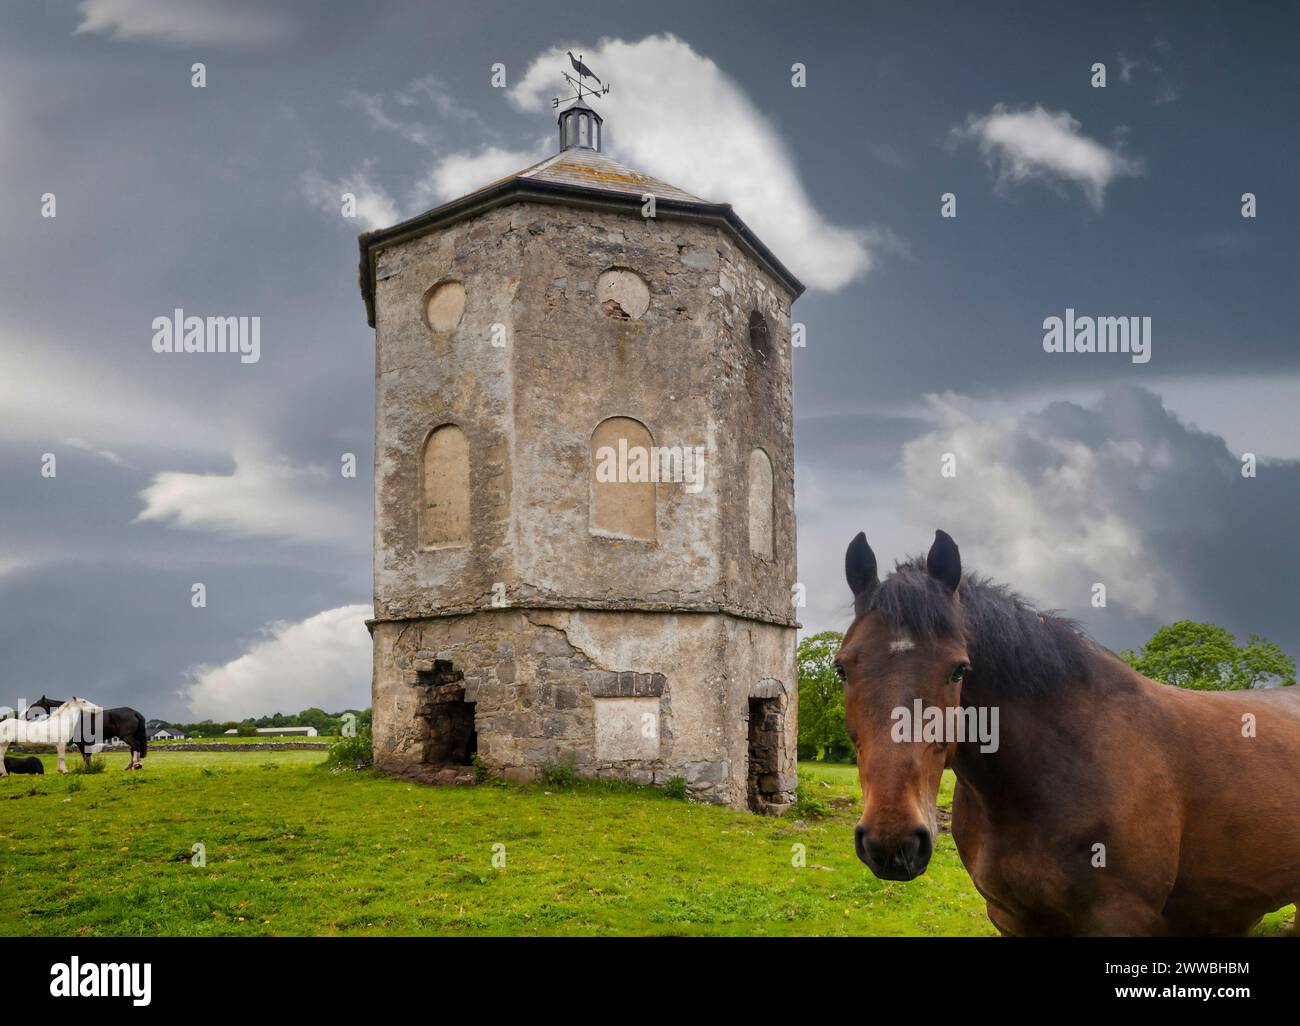 The Mosstown Pigeon House, a Georgian style dovecote built around 1750, in  County Longford, Ireland Stock Photo